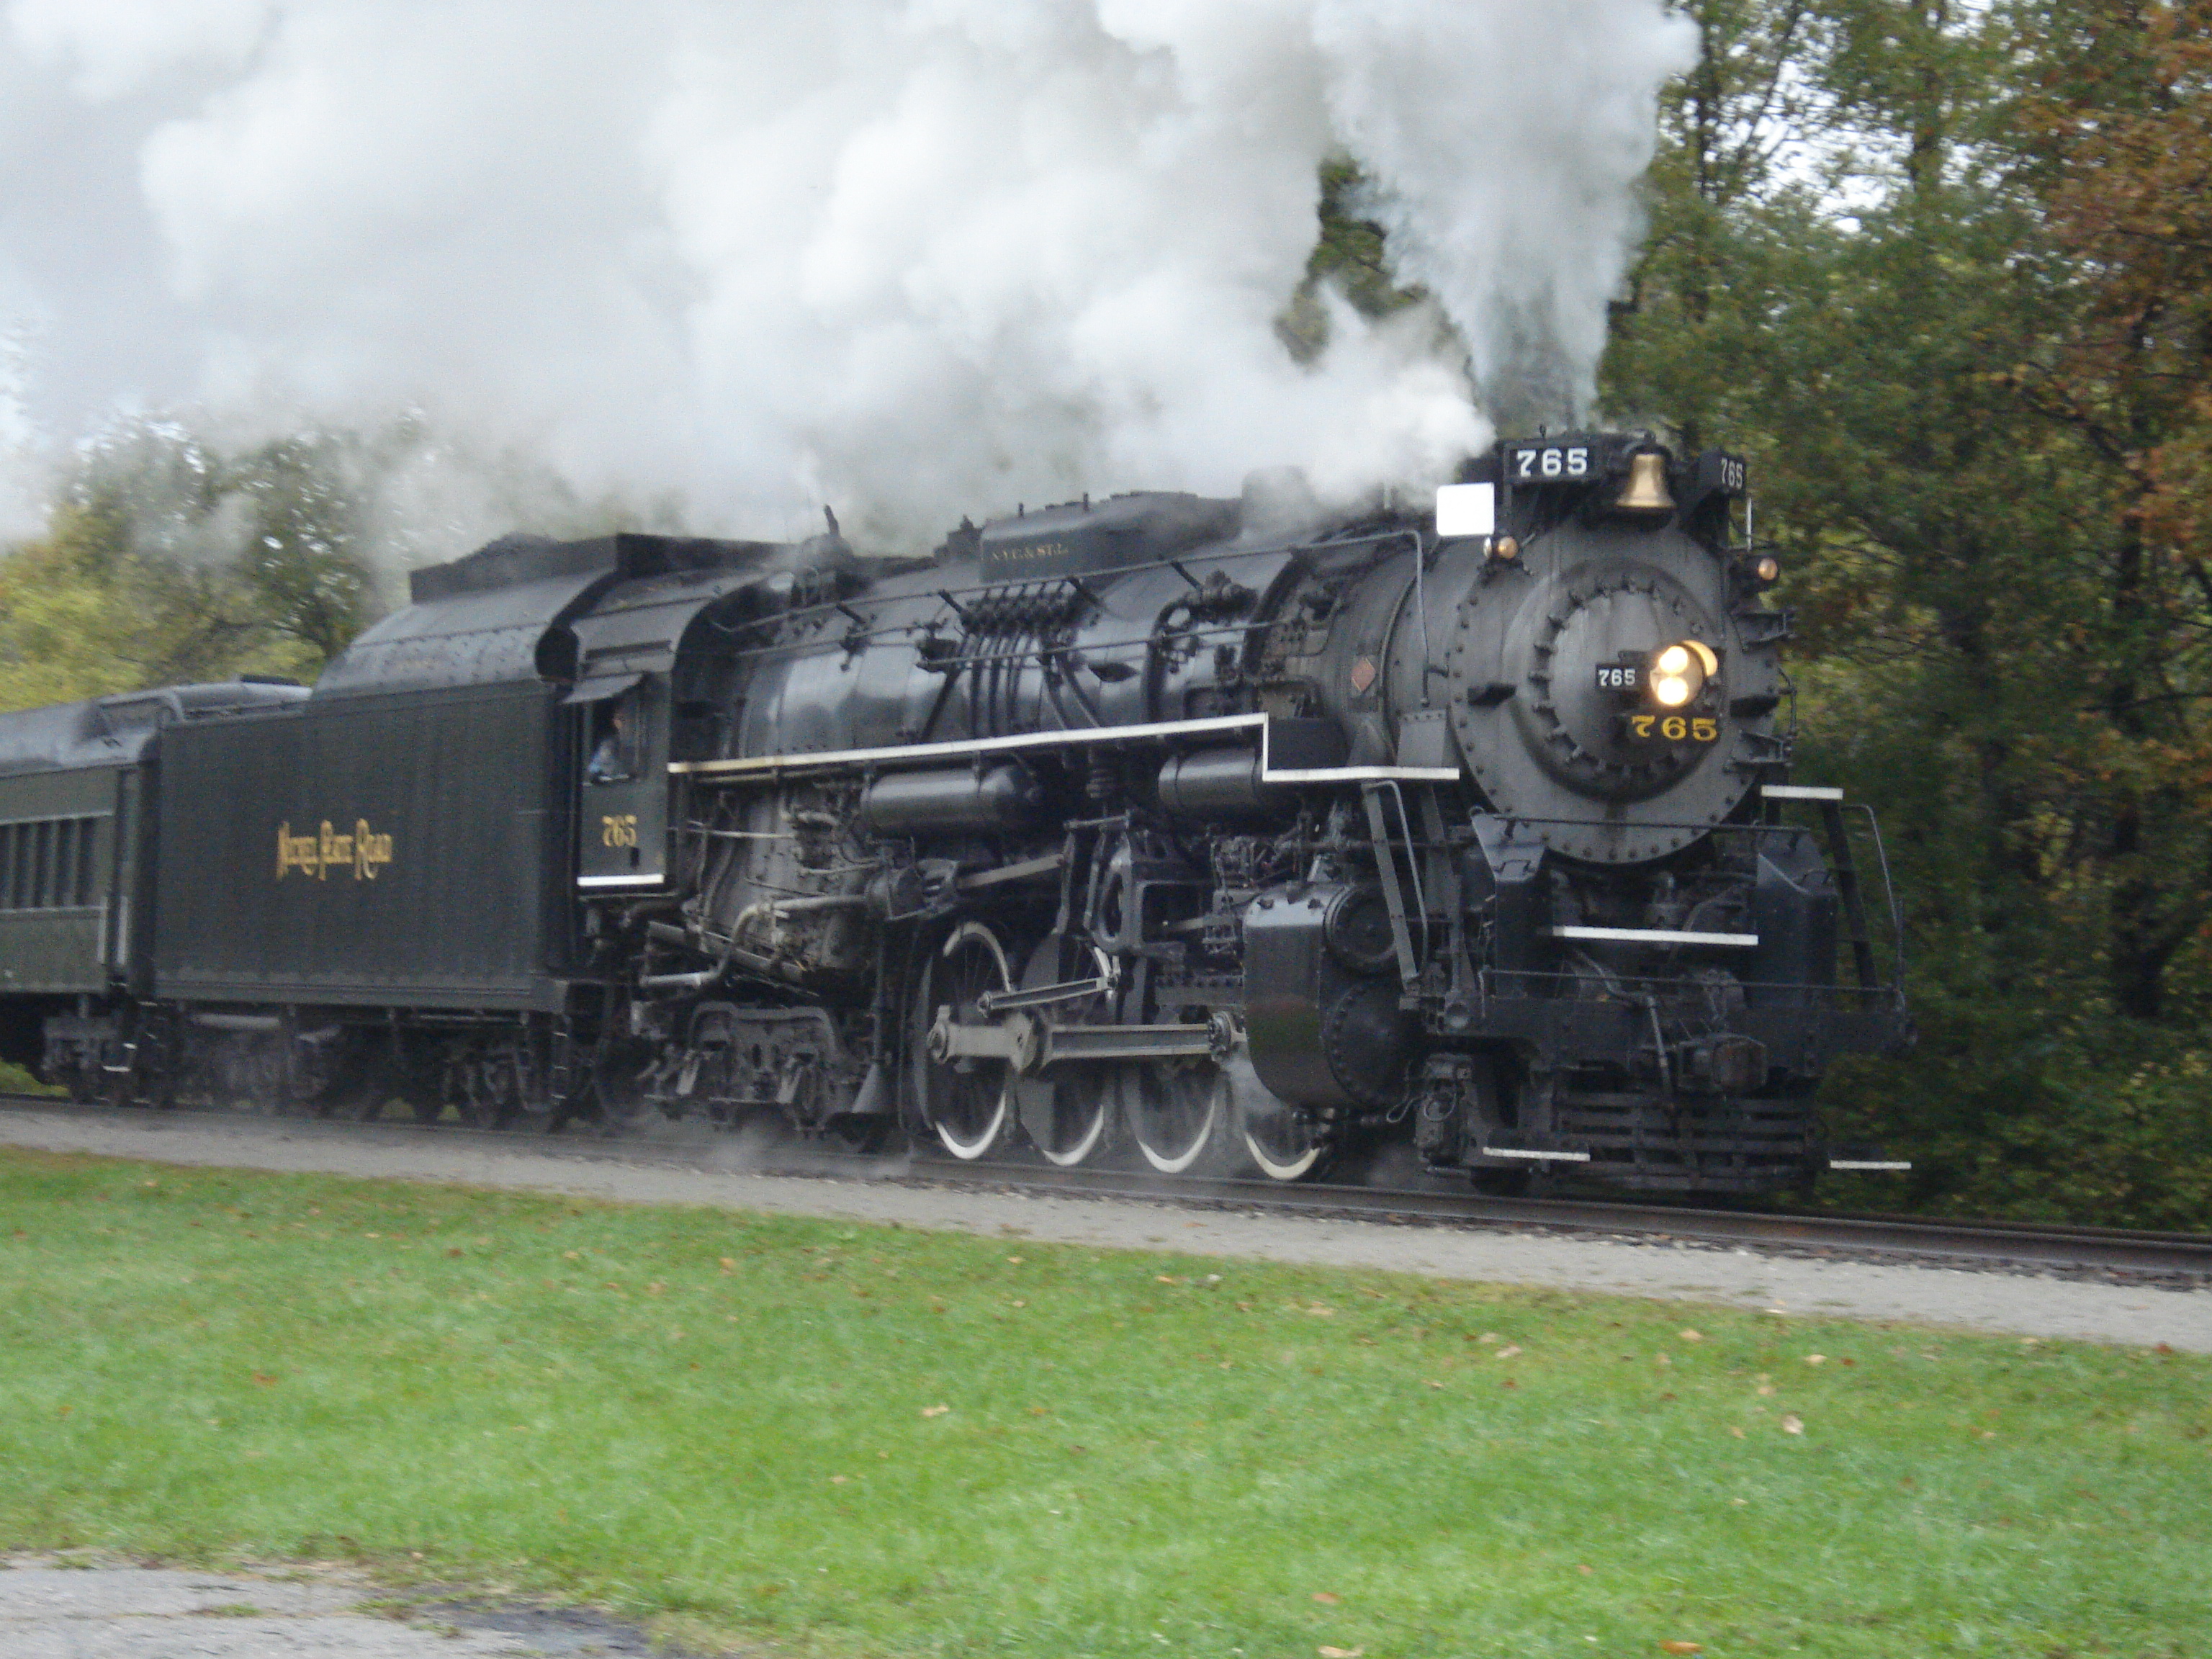 Retro Muscle: A Closer Look at the Nickel Plate #765 Steam ...